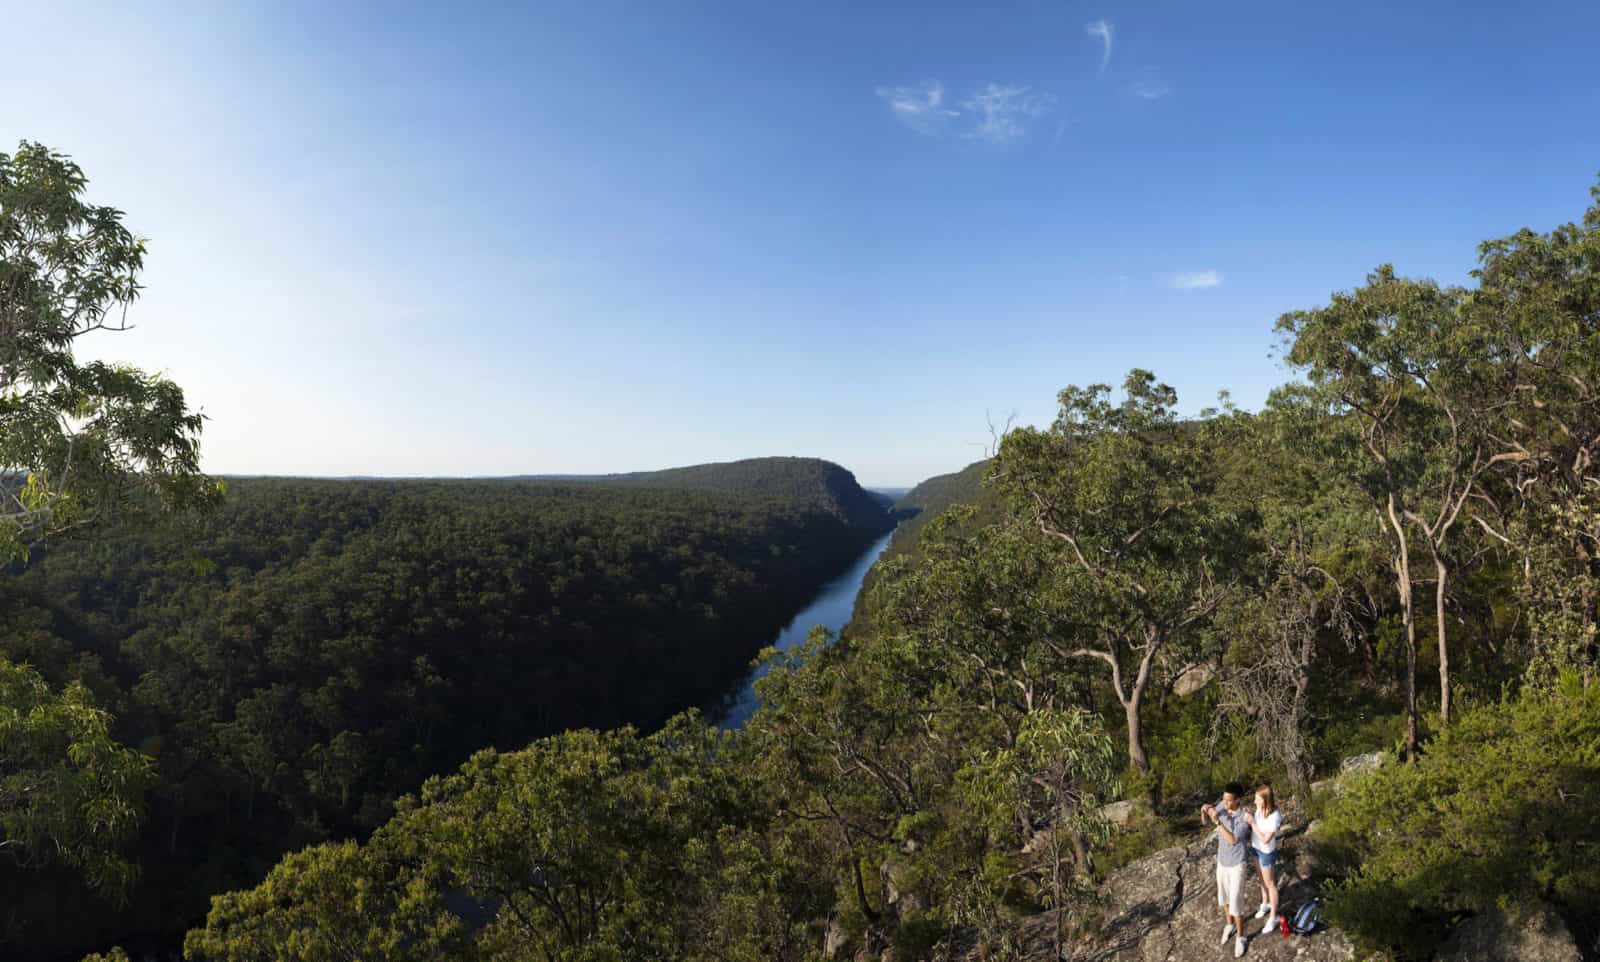 Couple walking near 'The Rock' lookout at Nepean River, Penrith